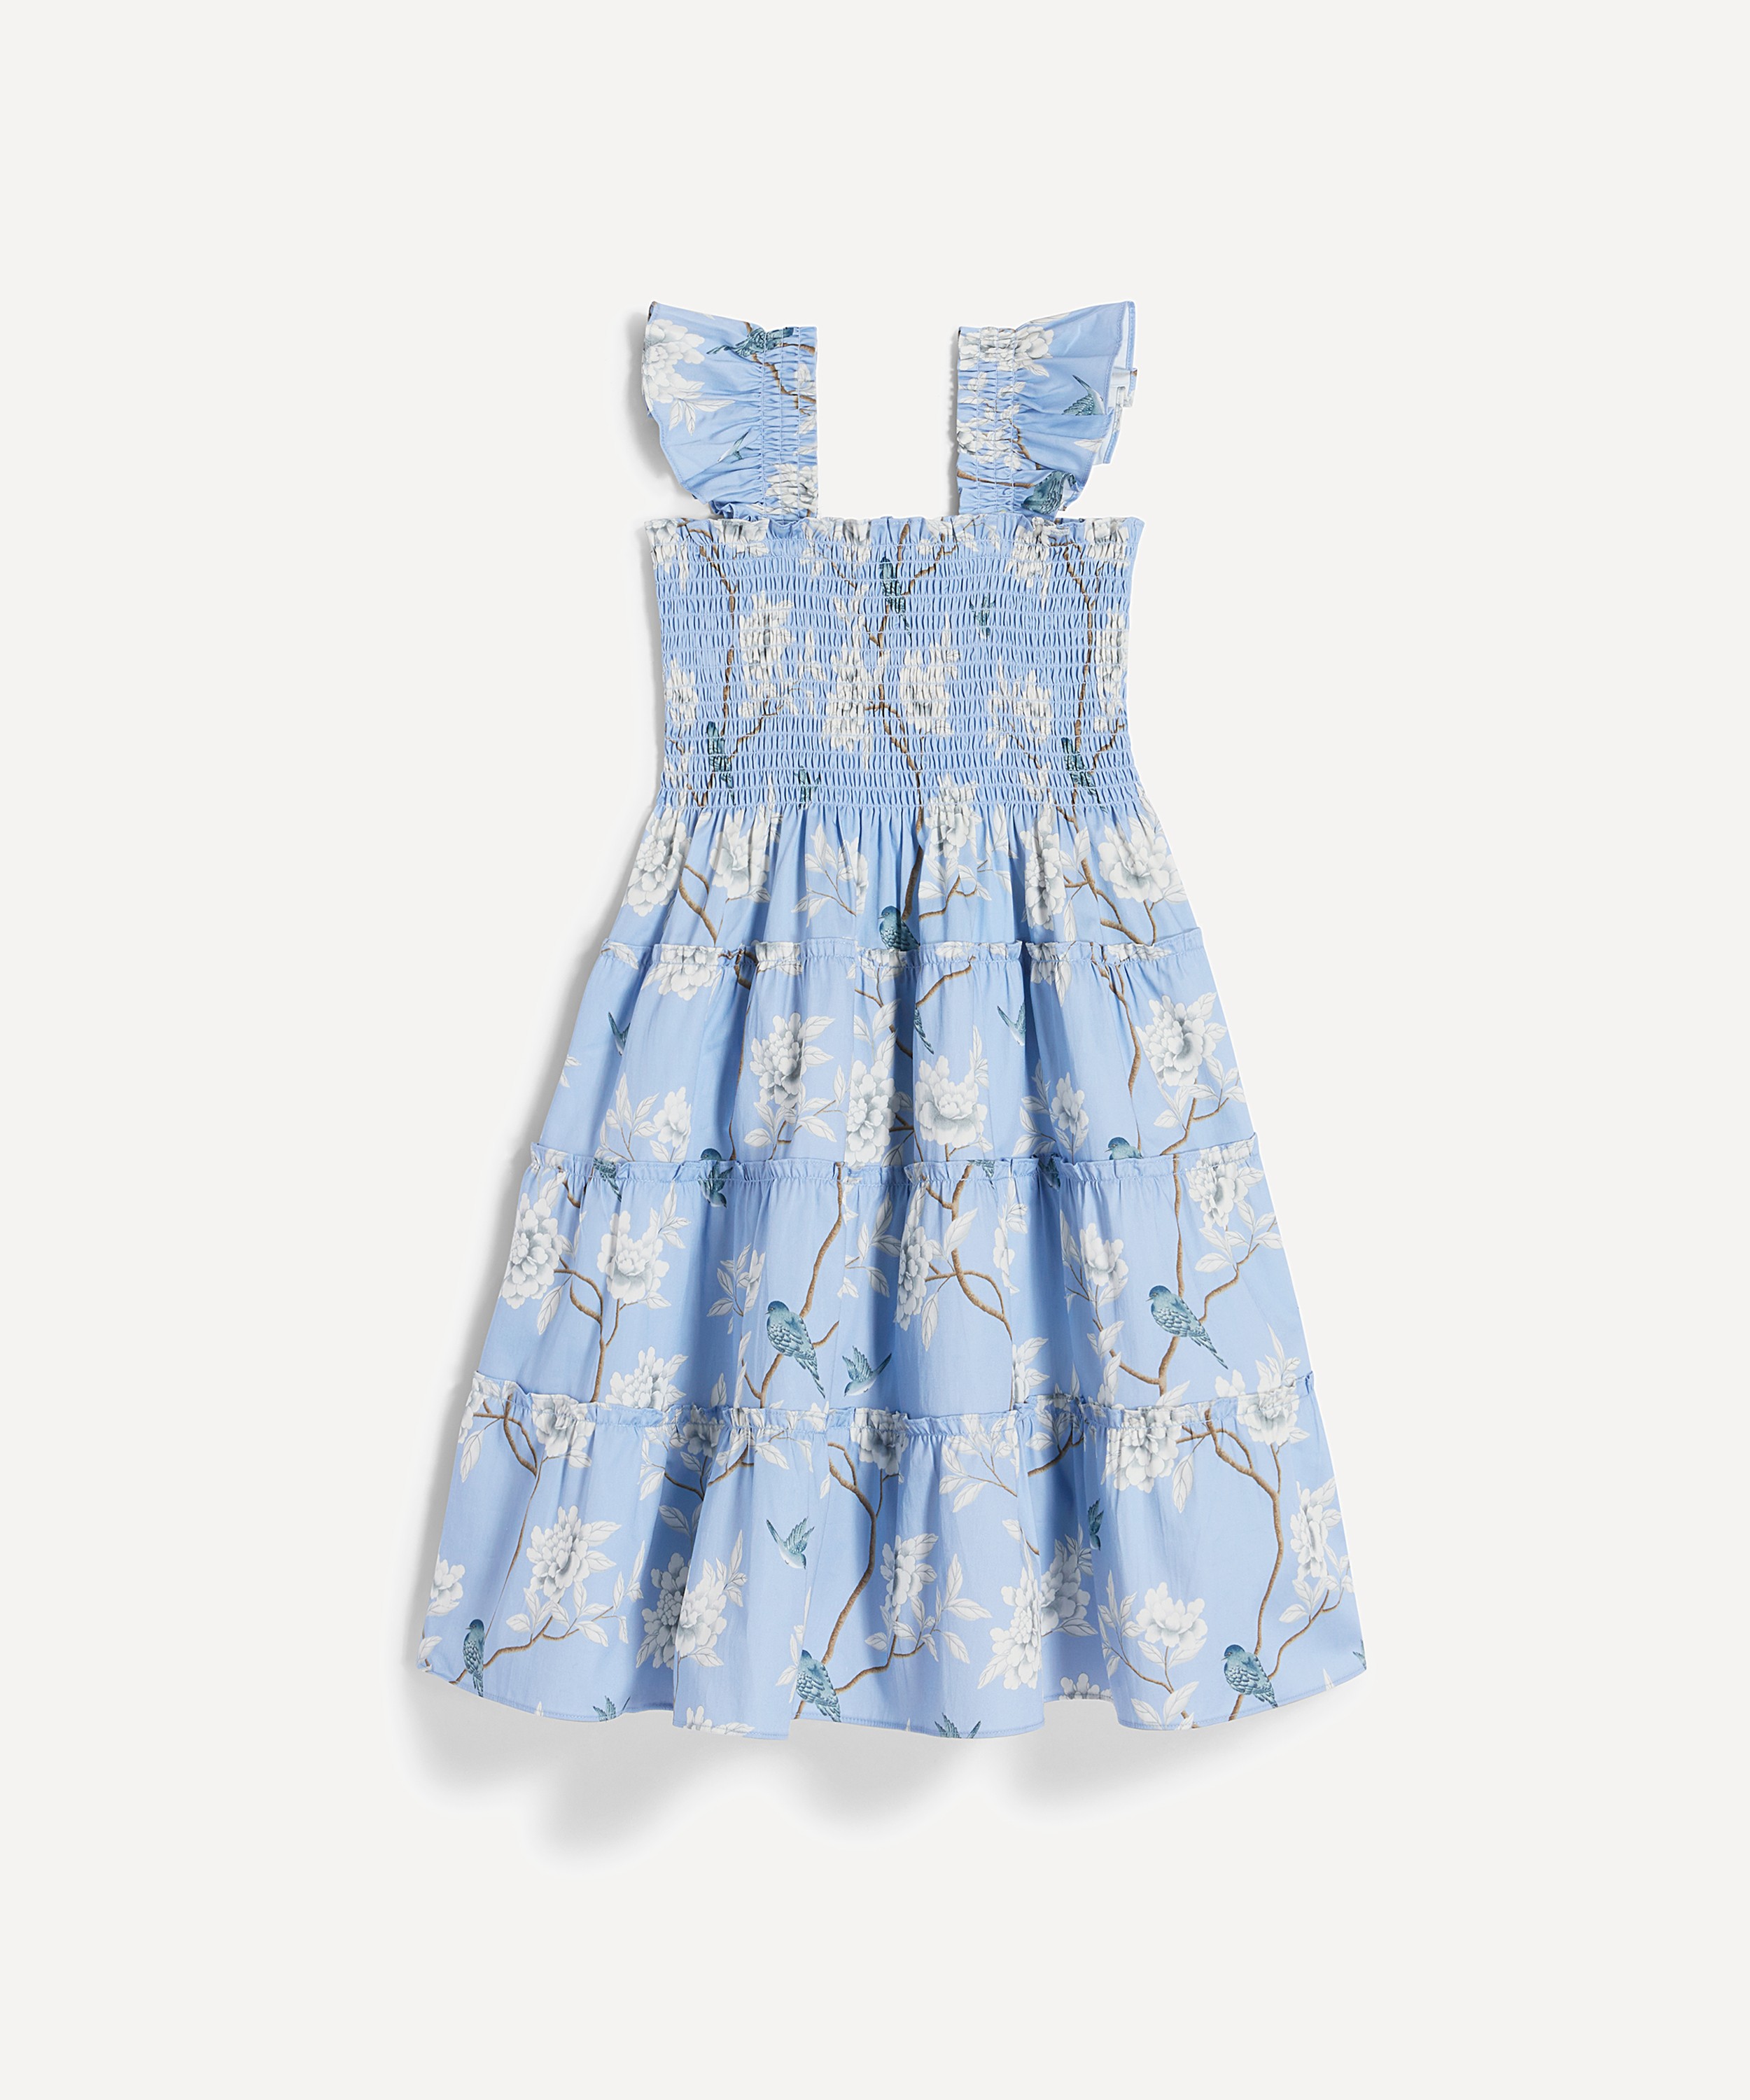 Hill House Home - Tiny and Baby Ellie Nap Dress in Blue Chinoiserie 